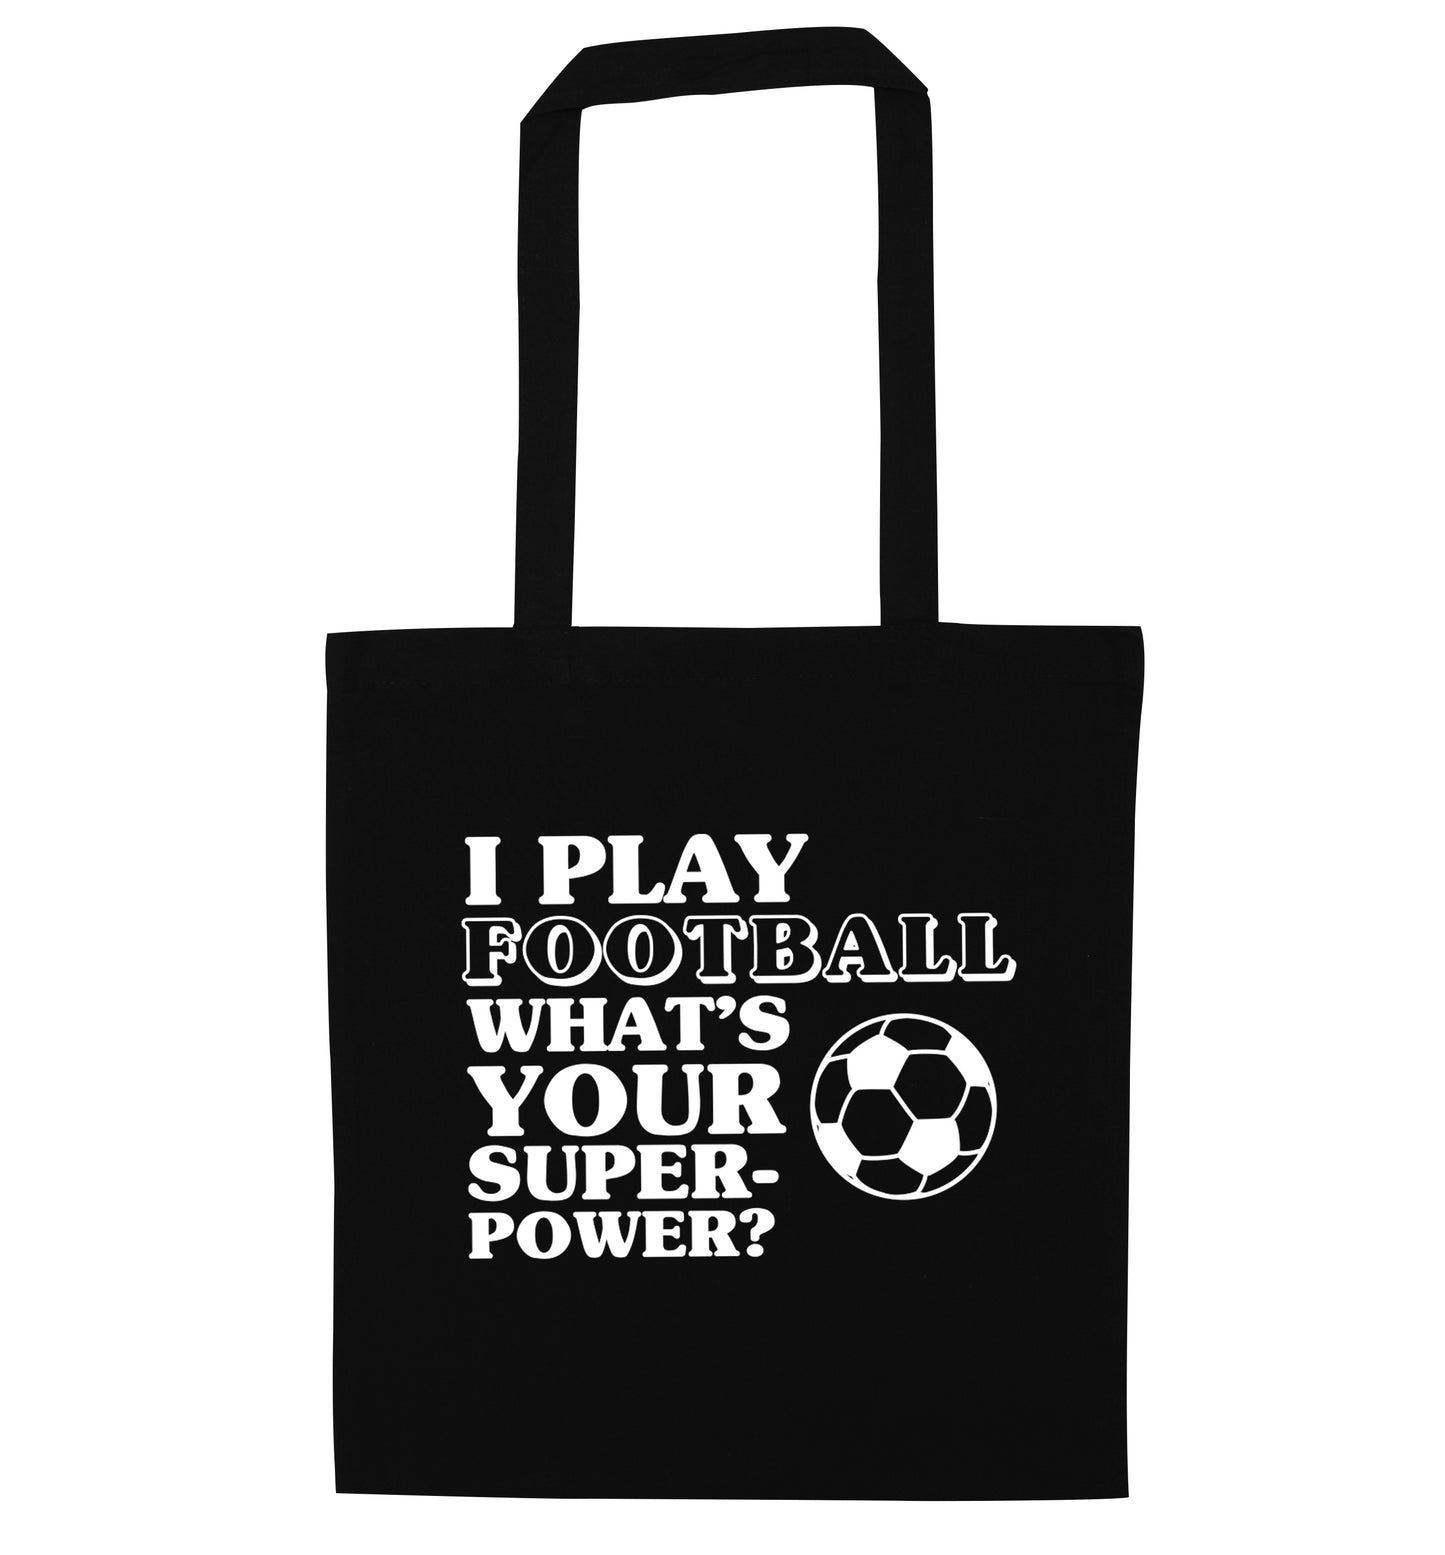 I play football what's your superpower? black tote bag